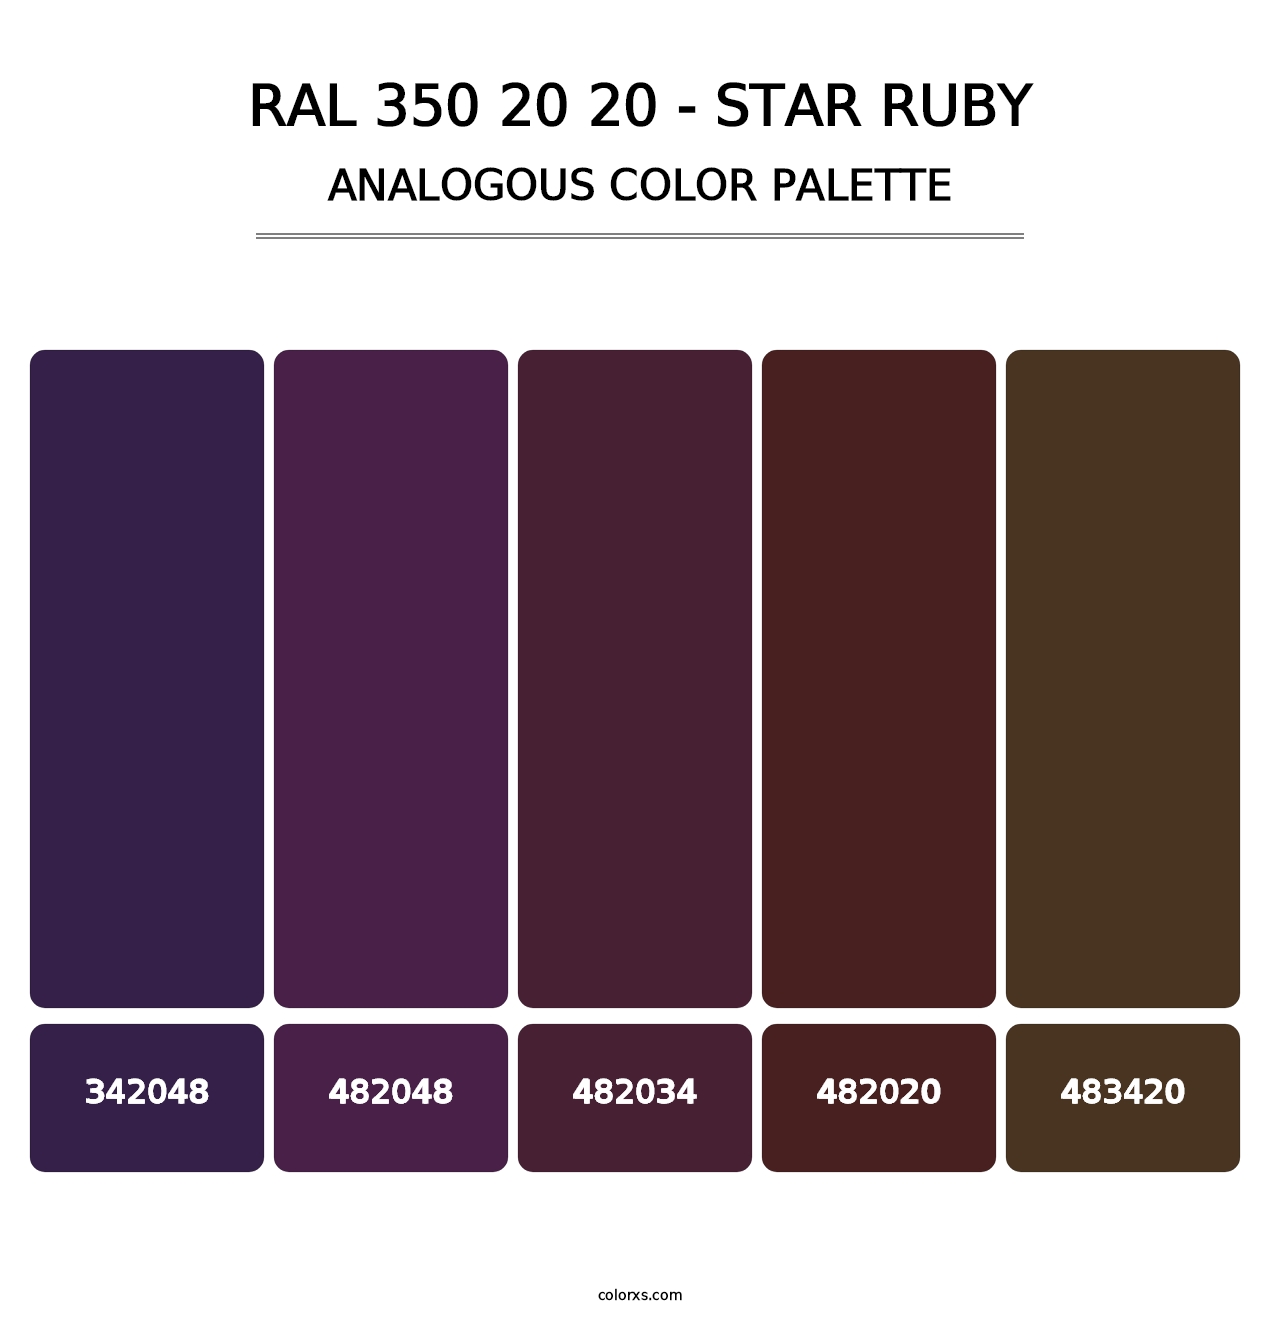 RAL 350 20 20 - Star Ruby - Analogous Color Palette